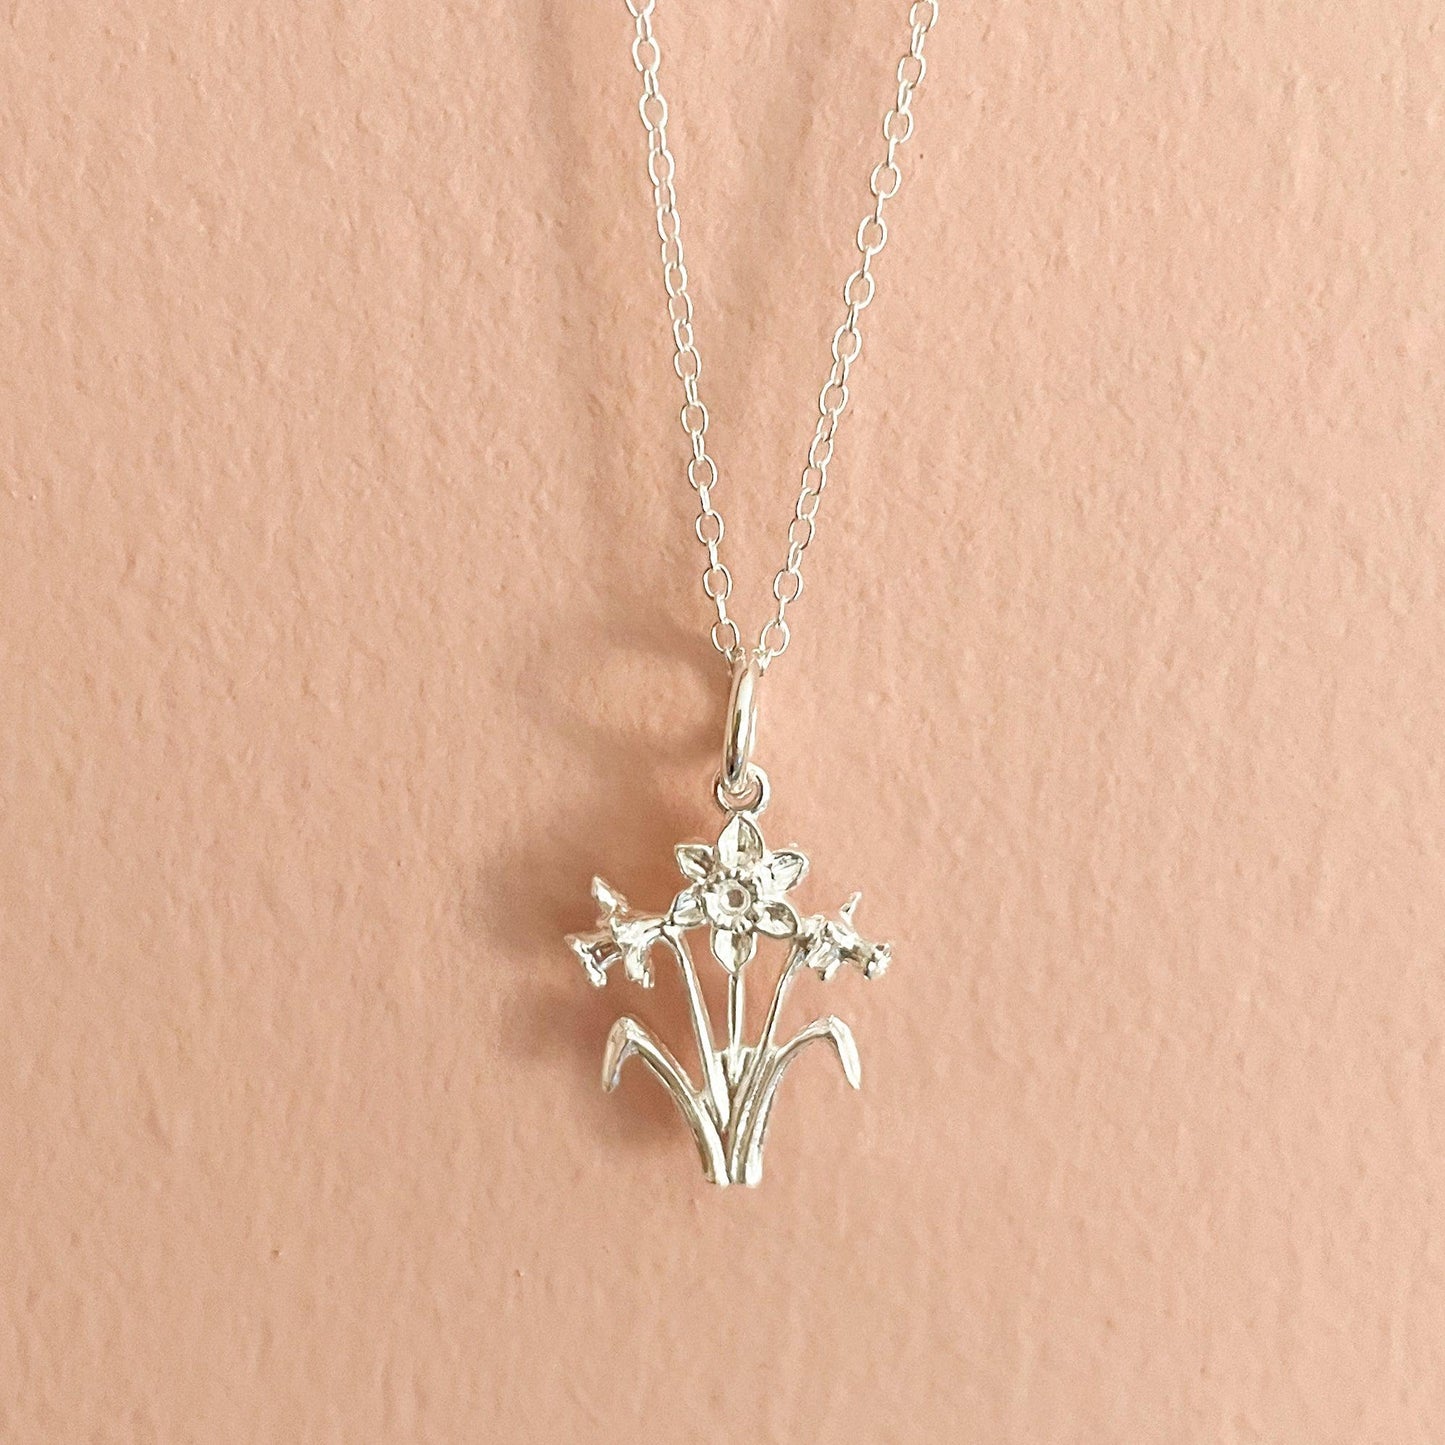 Necklace - Sterling Silver - Welsh Daffodils - 16" Chain